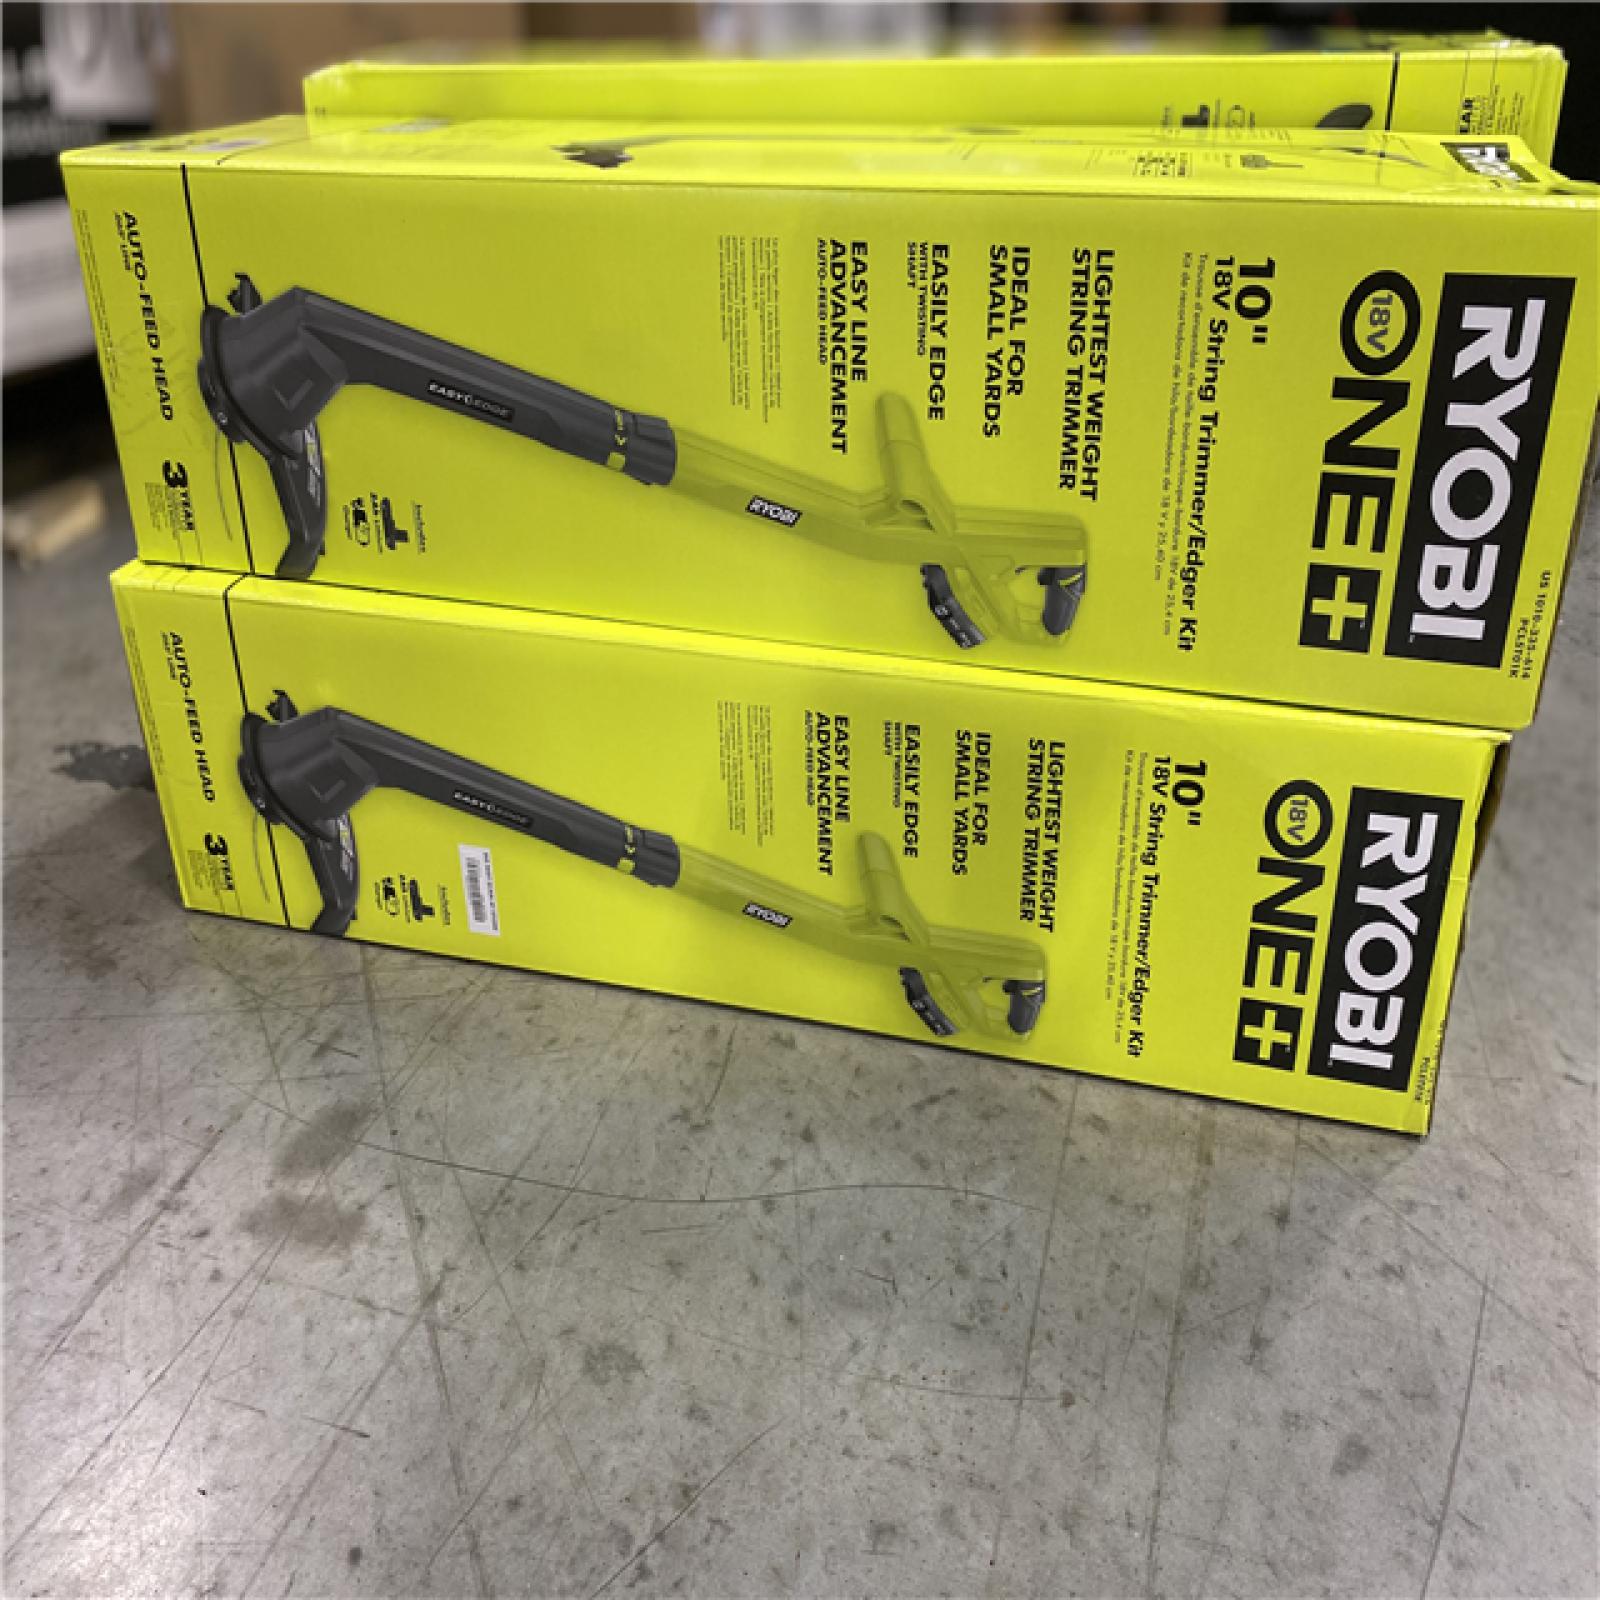 NEW! - RYOBI ONE+ 18V 10 in. Cordless Battery String Trimmer/Edger with 2.0 Ah Battery and Charger - (4 UNITS)